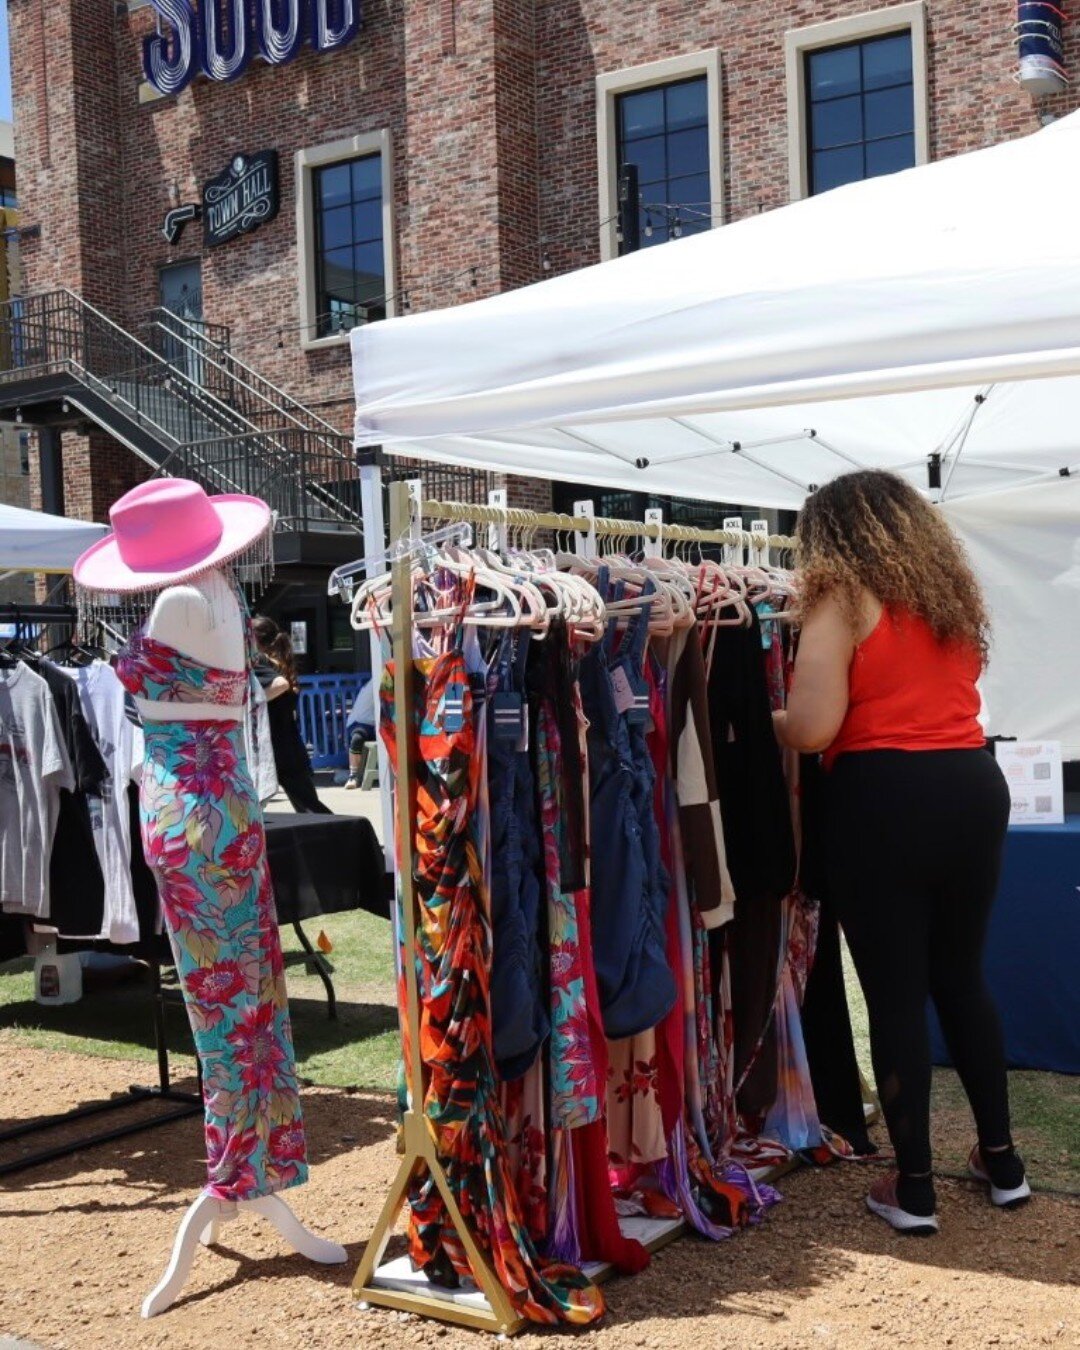 Come down to The Sound today from 1-5pm @ntx_vintage_markets will be hosting a market with local vendors. Enjoy music, drinks and delicious eats from our retailers all while you check out the treasures these local vendors have to offer.